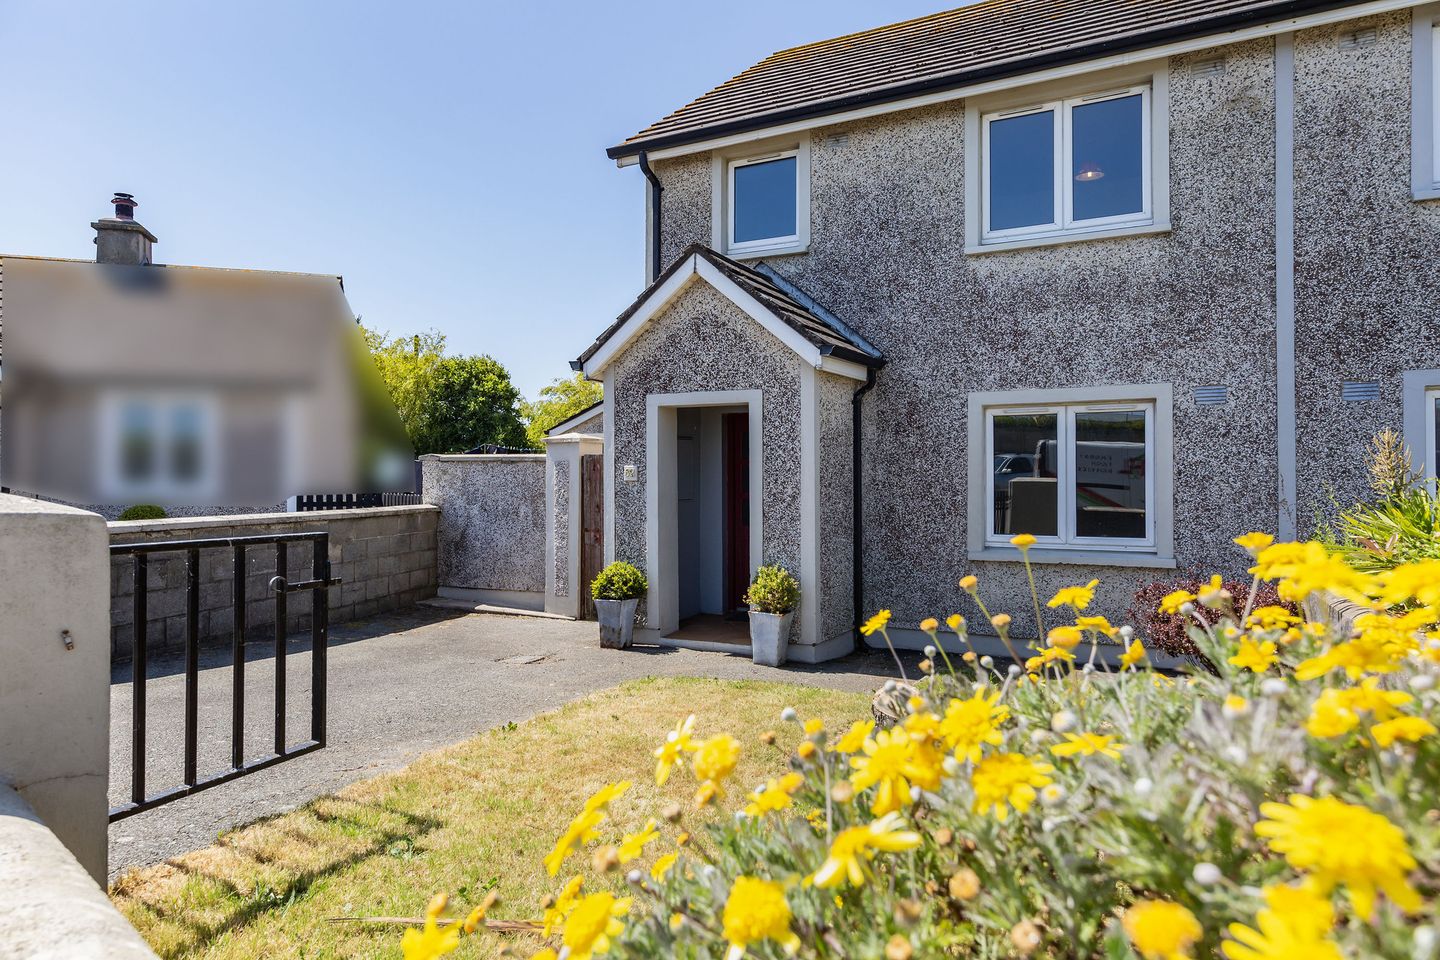 52 Commodore Barry Park, Rosslare Strand, Co. Wexford, Y35PC4V